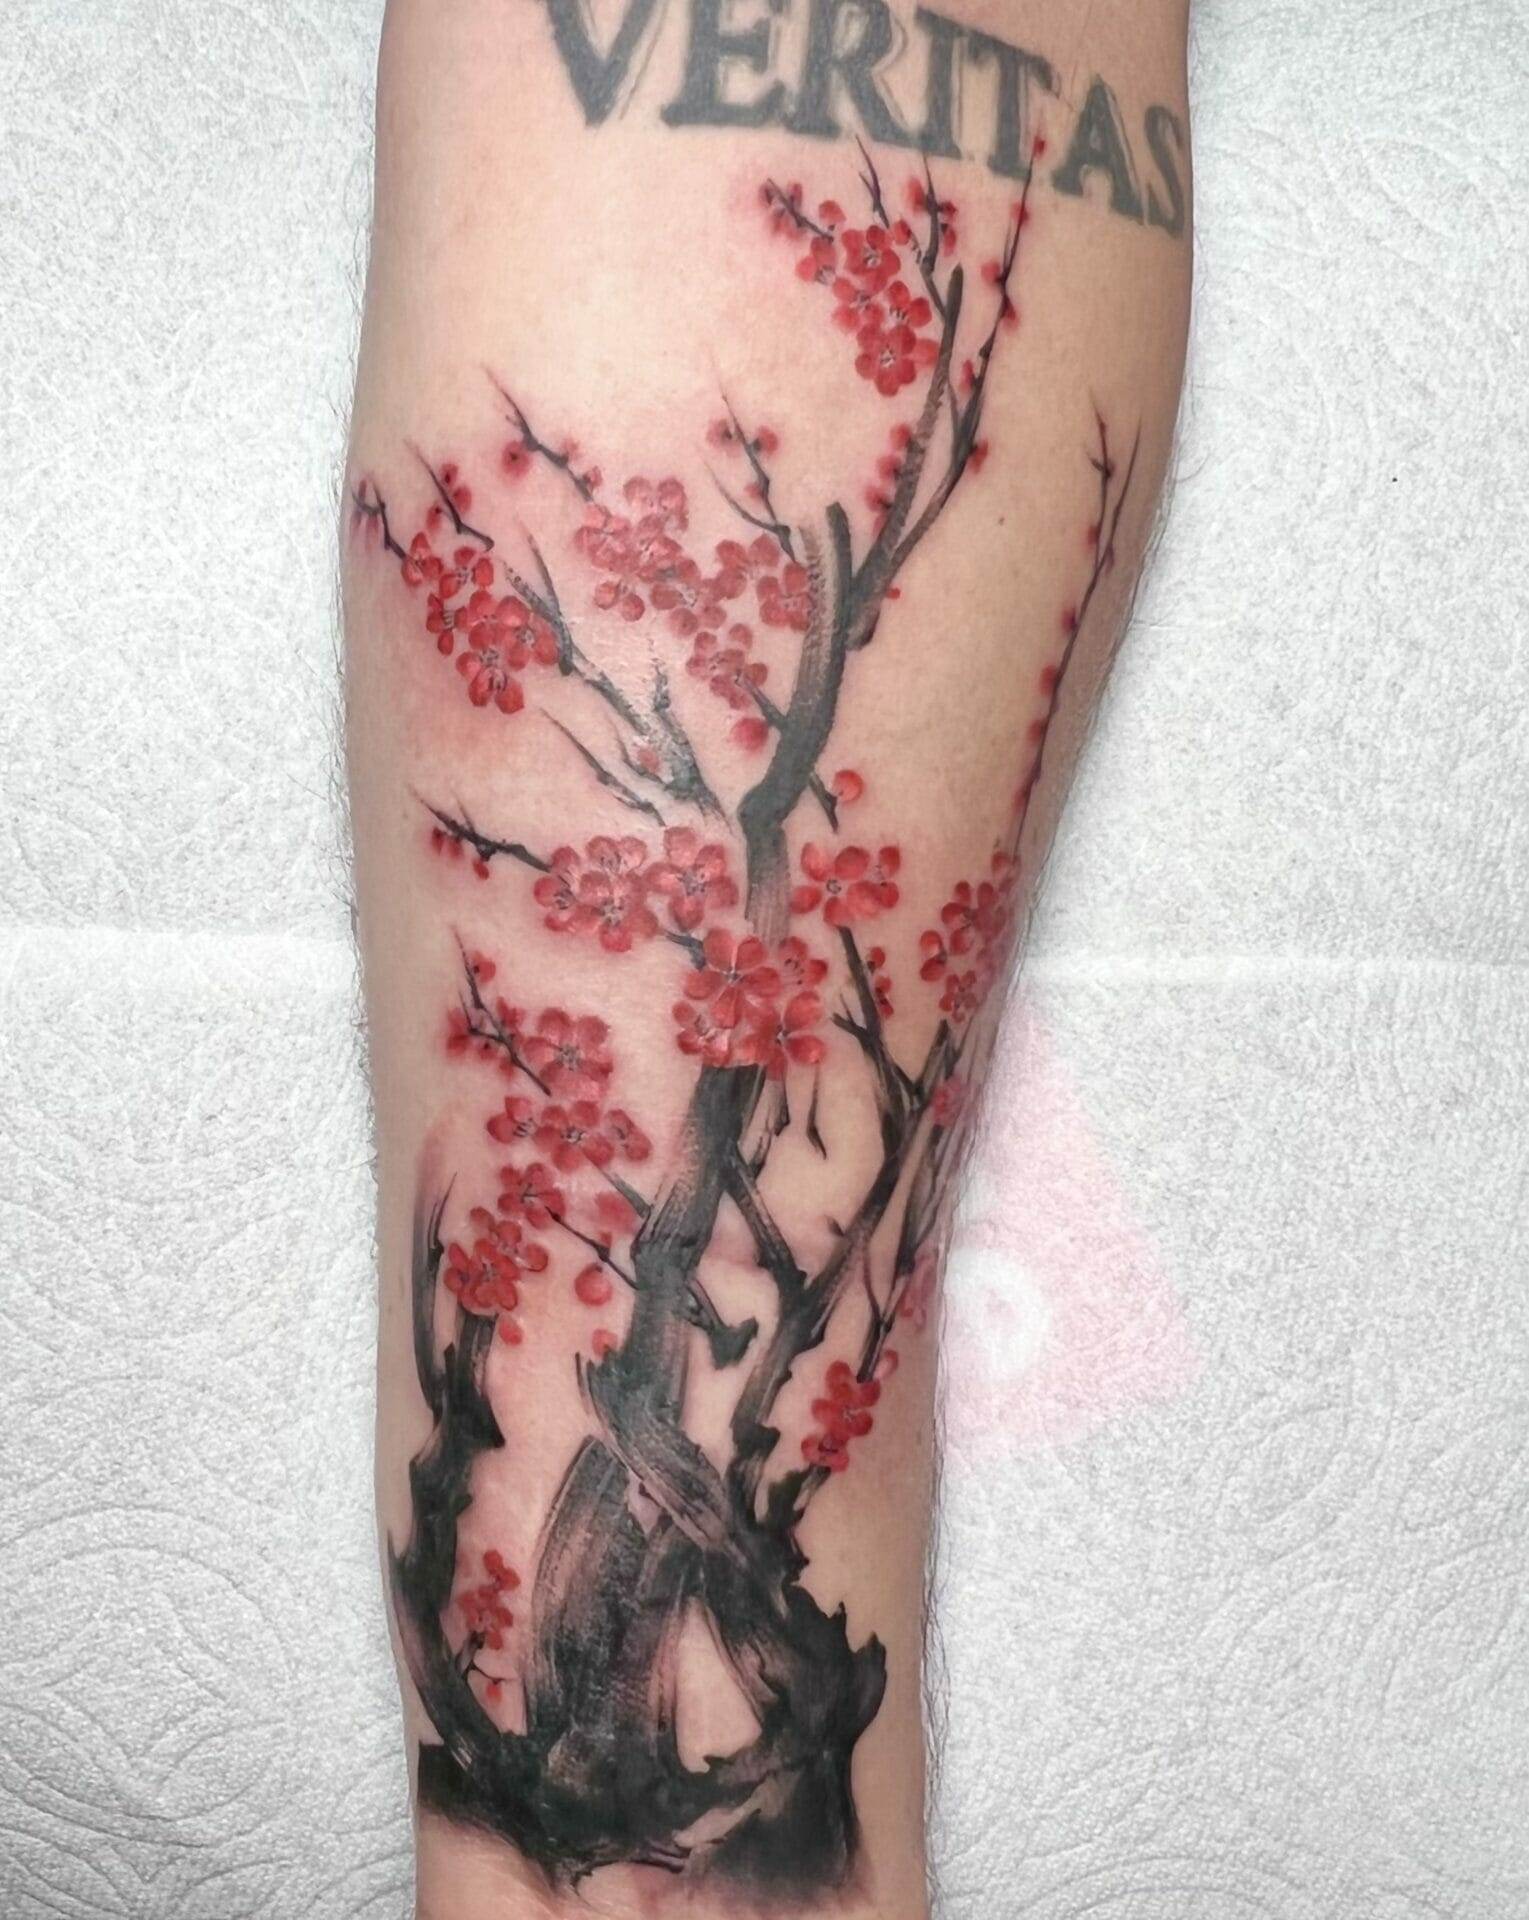 Japanese Tattoos and Their Meanings - Tattooing 101